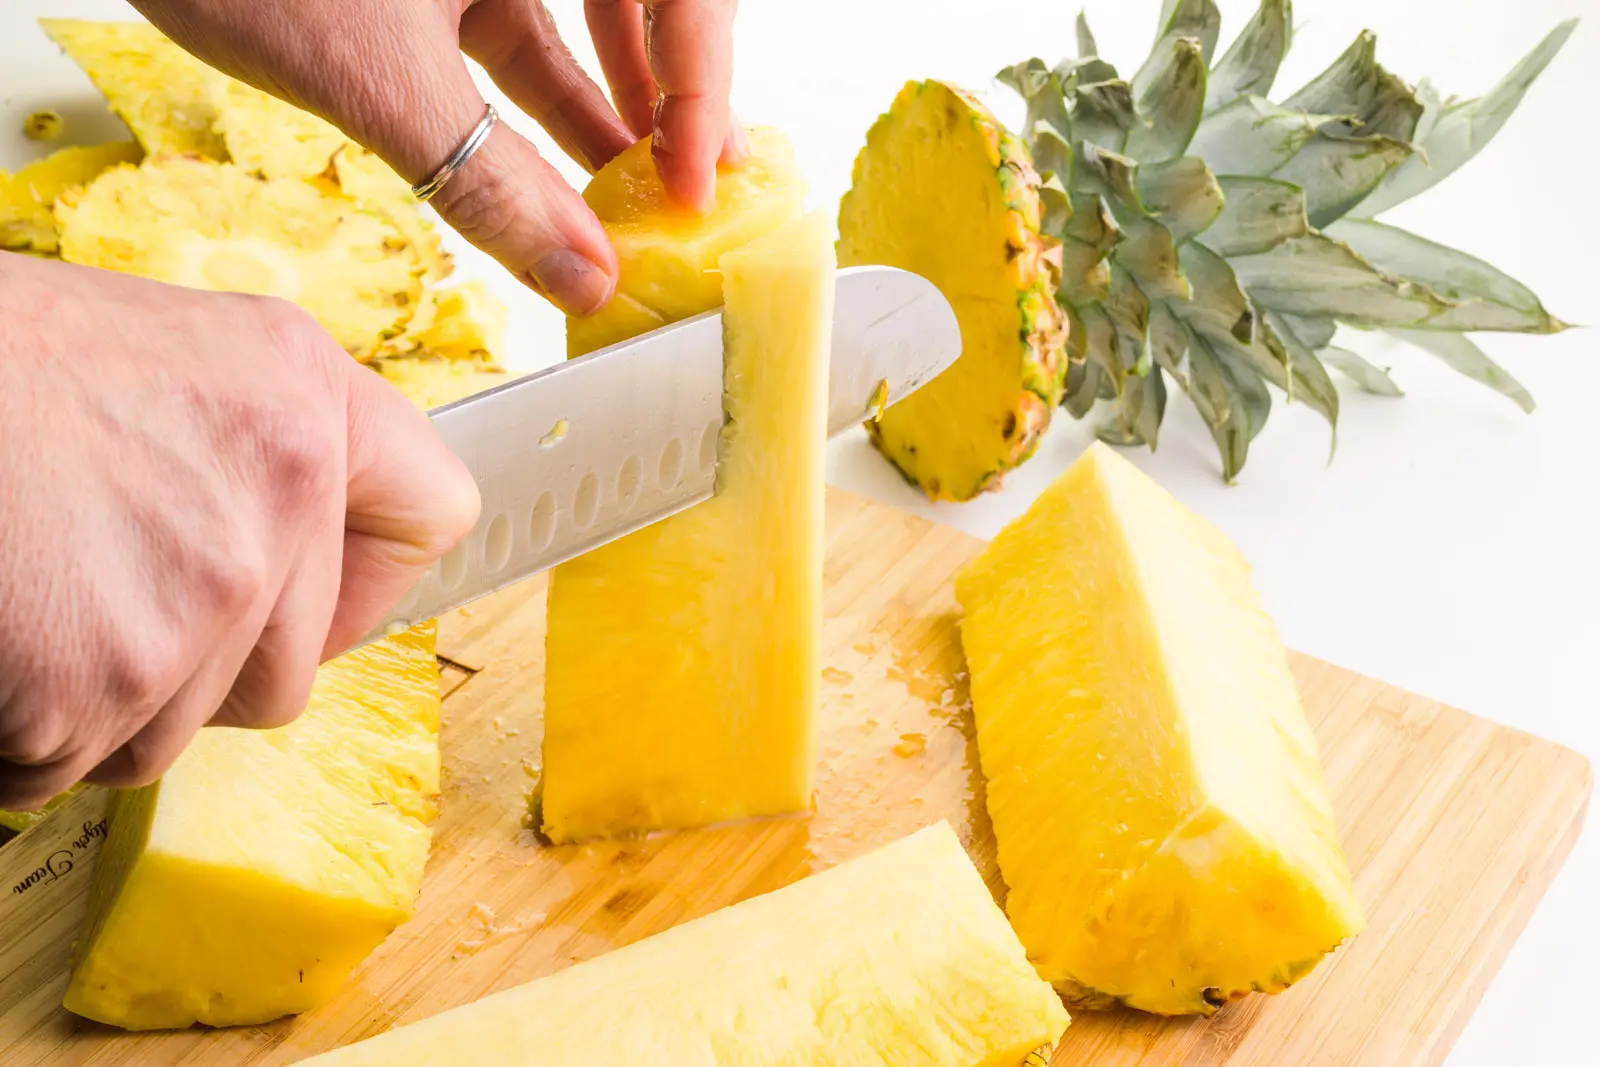 A hand holds a knife cutting down on a quartered piece of a pineapple, removing the core. There are pieces of pineapple sitting next to it on a cutting board.